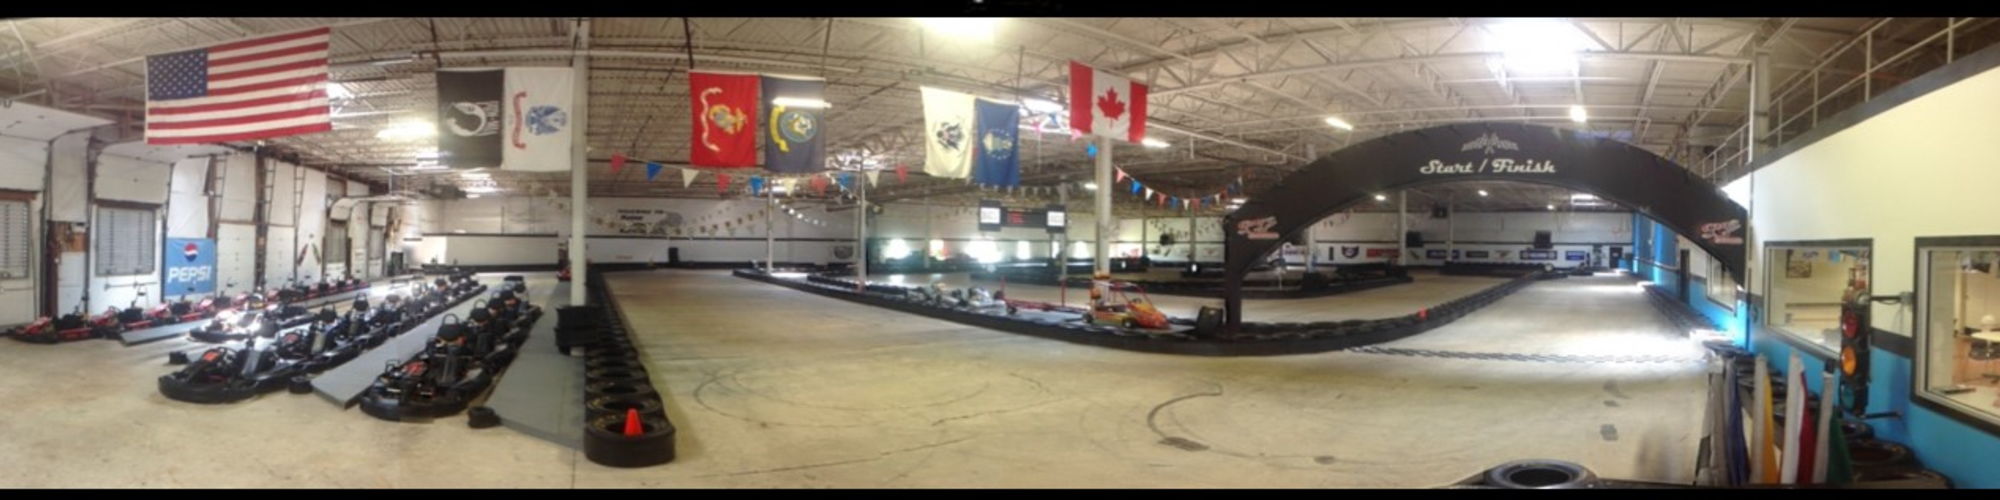 Maine Indoor Karting cover image